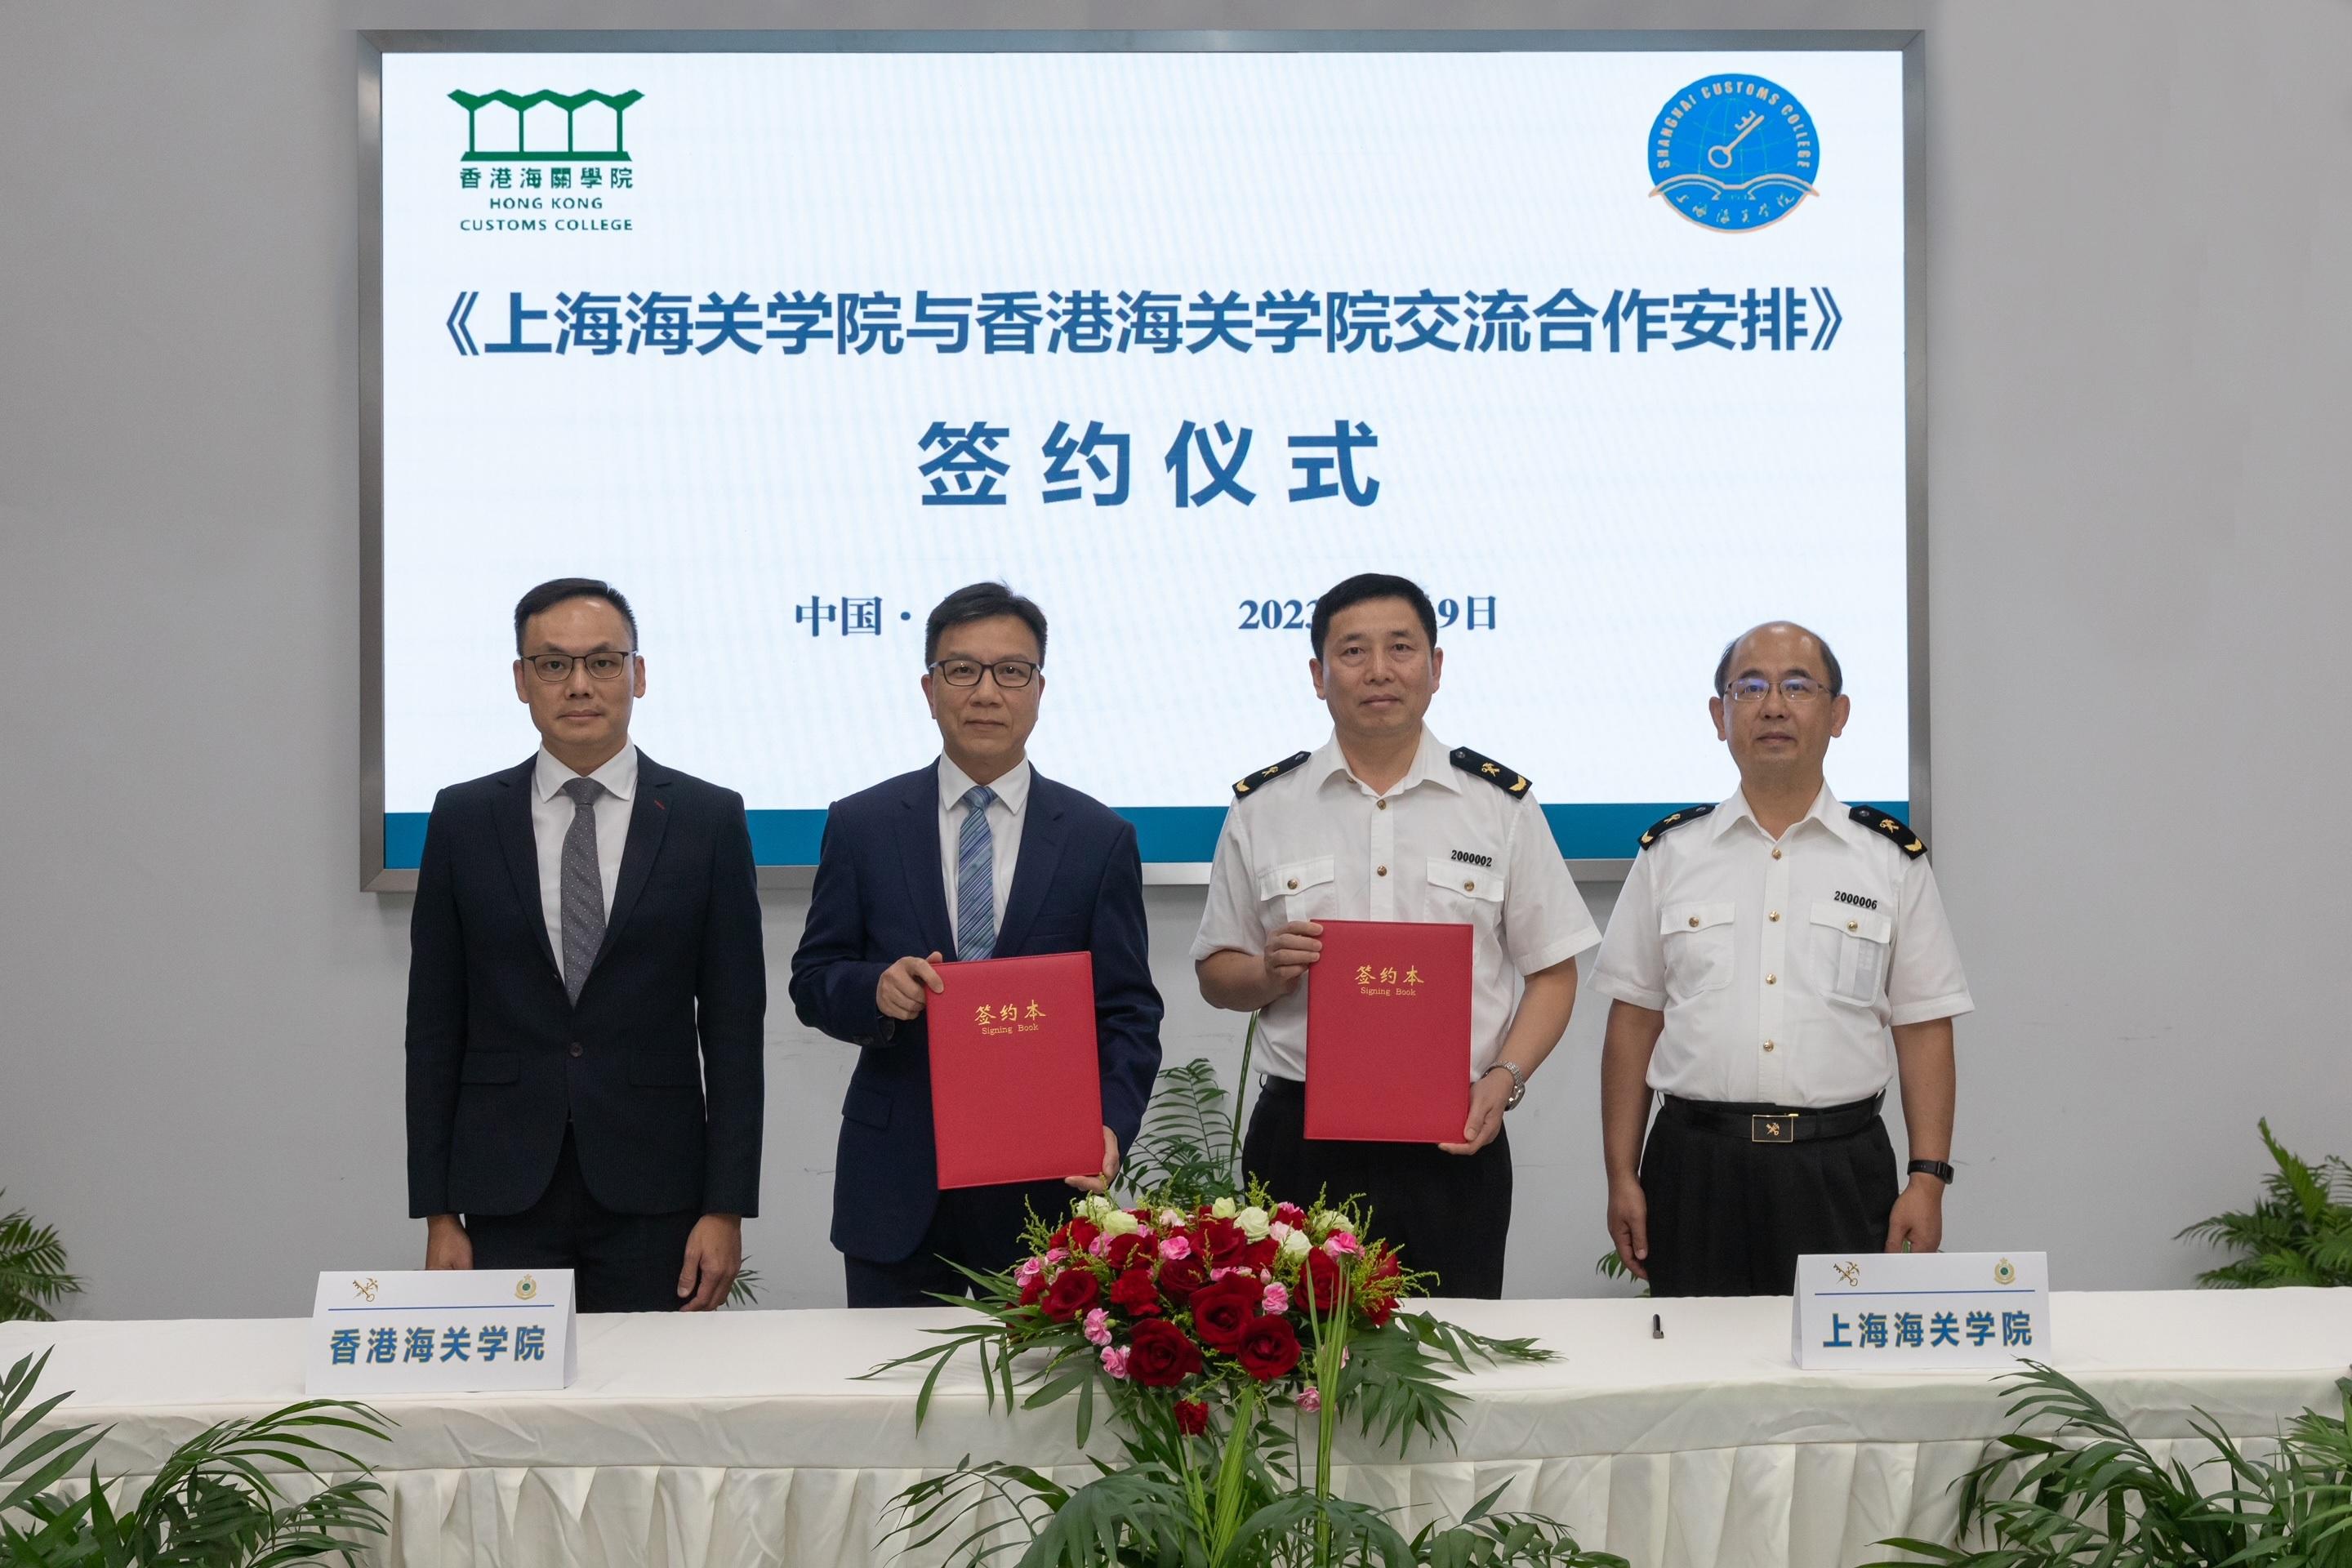 The Deputy Commissioner of Customs and Excise (Management and Strategic Development), Mr Ellis Lai (second left), and the President of the Shanghai Customs College, Mr Cong Yuhao (second right), yesterday (September 9) witnessed in Shanghai the signing of the Co-operative Arrangement on exchange and co-operation between the Shanghai Customs College and the Hong Kong Customs College by the Commandant of the Hong Kong Customs College, Mr Eddie Lai (first left), and Vice President of the Shanghai Customs College Mr Wang Xiaogang (first right).